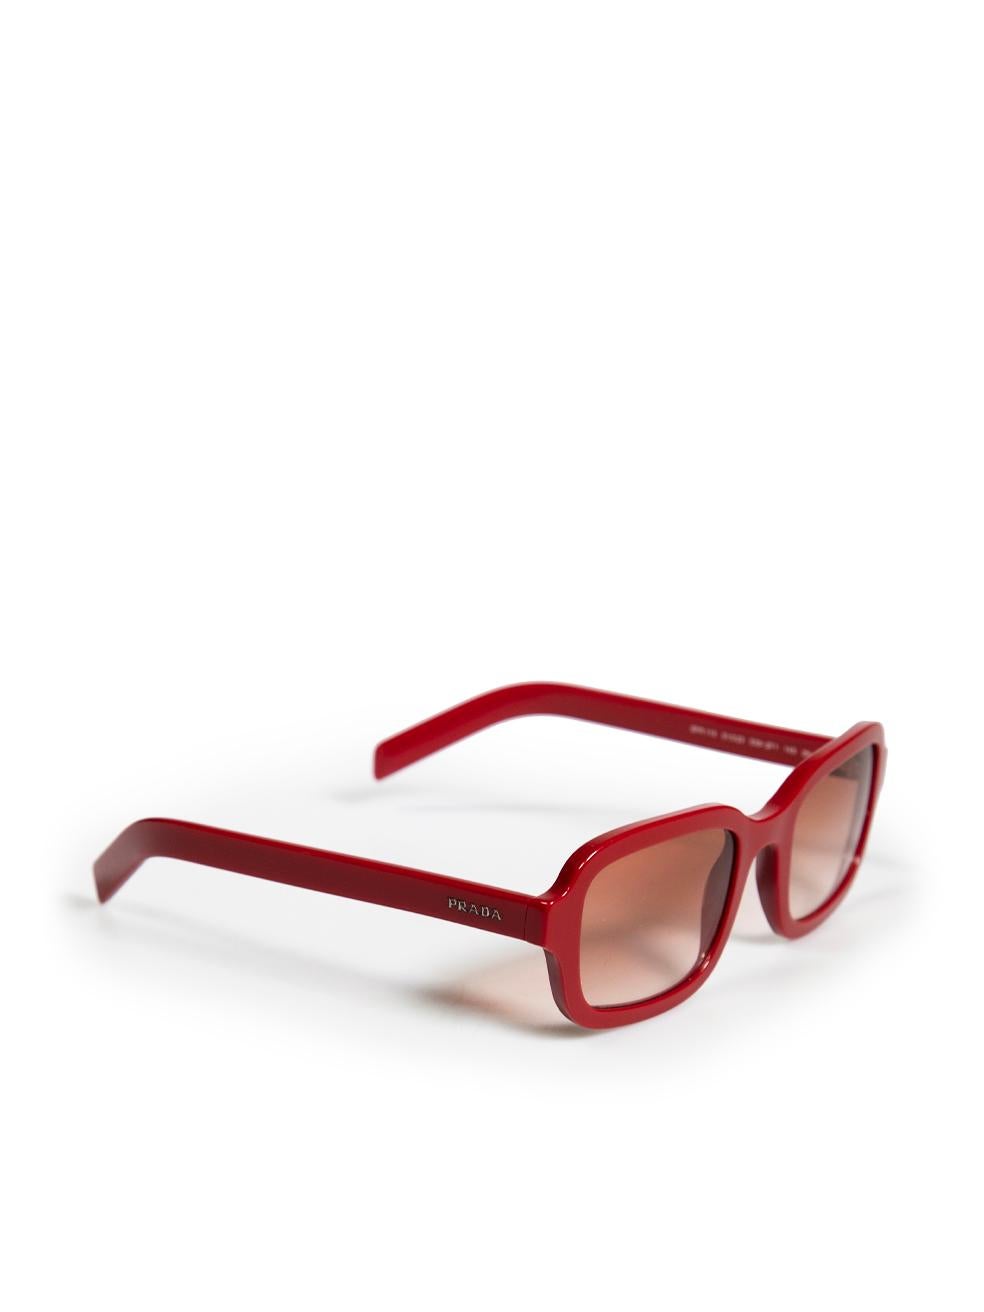 CONDITION is Very good. Minimal wear to sunglasses is evident. Minimal wear to the right side with a small scratch to the lens and frame on this used Prada designer resale item. These sunglasses come with original case.
 
 
 
 Details
 
 
 Red
 
